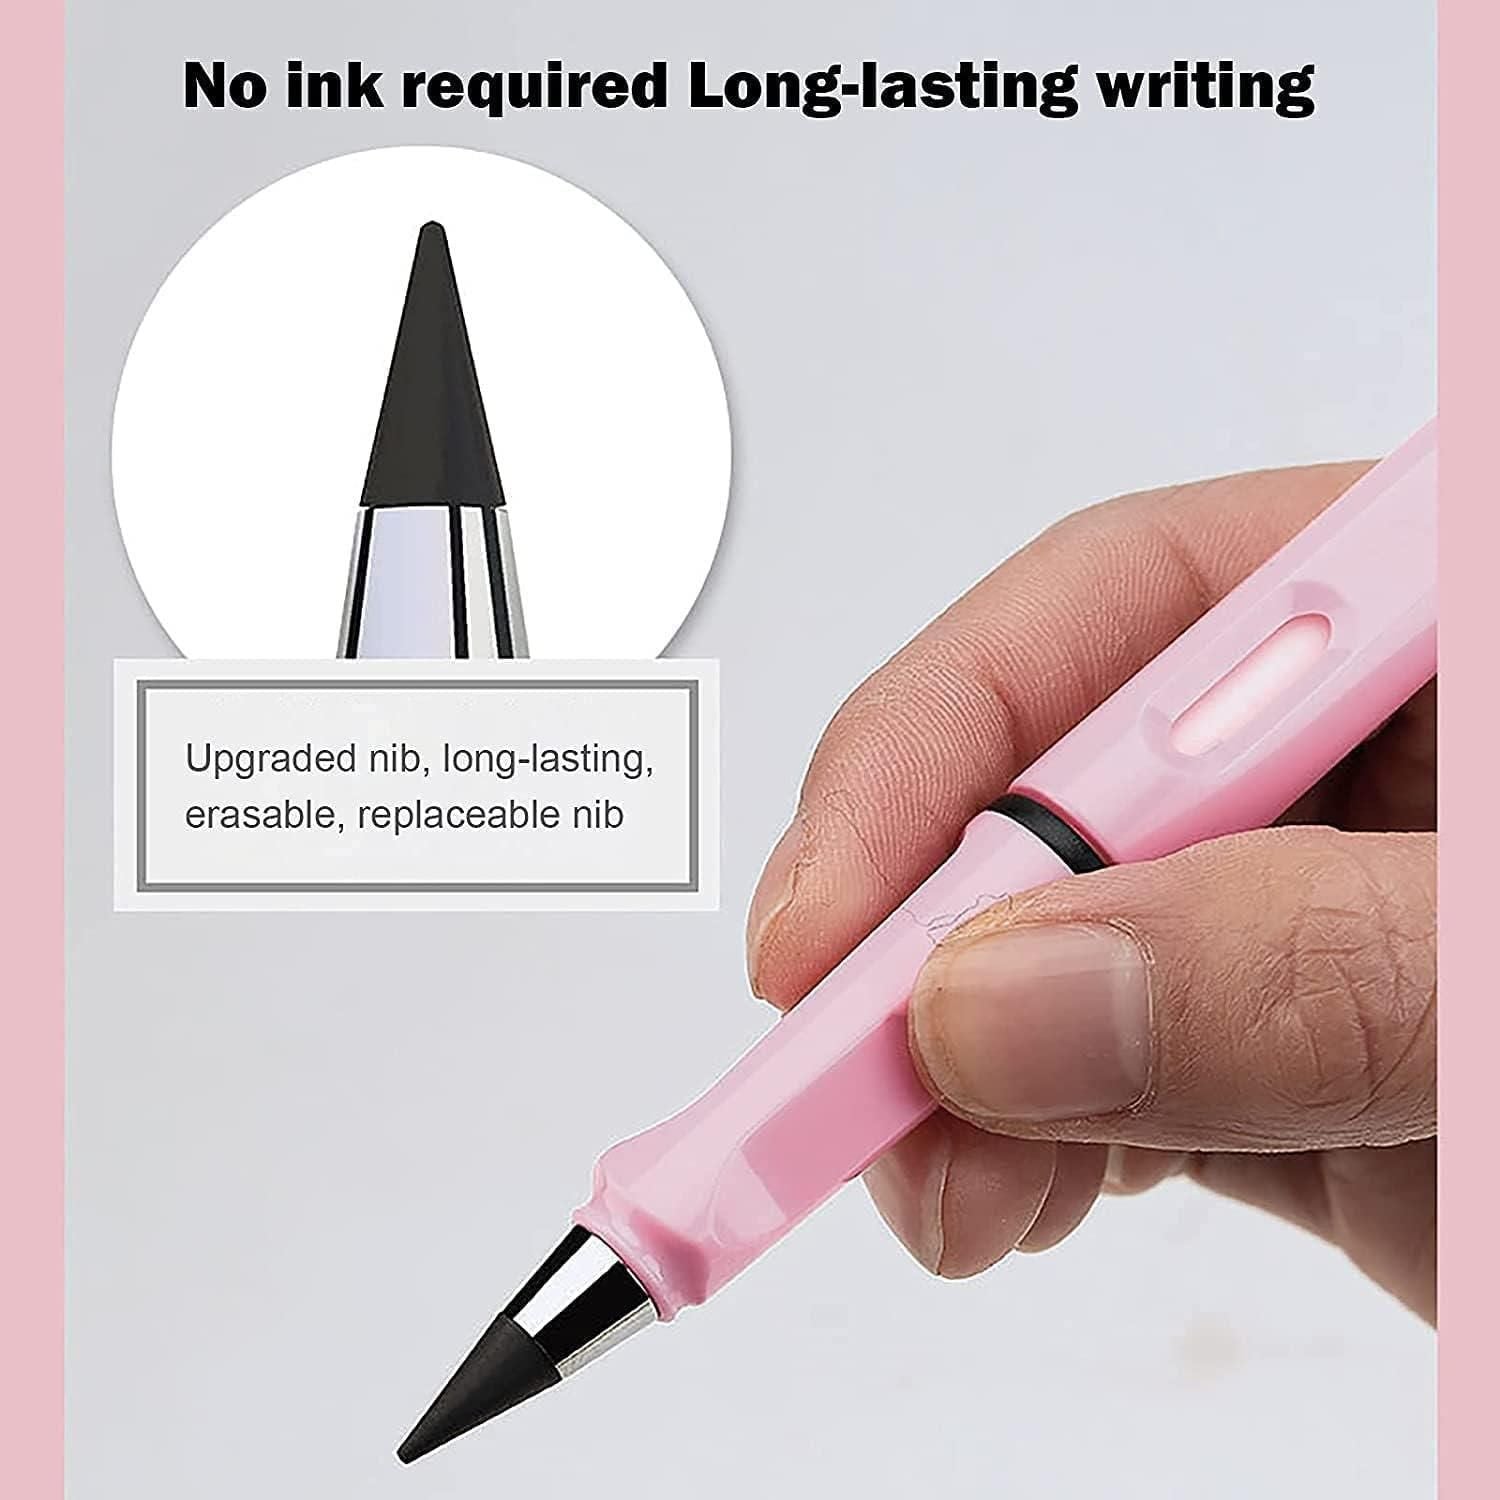 Reusable and Erasable Metal Writing Pens Pack of 2